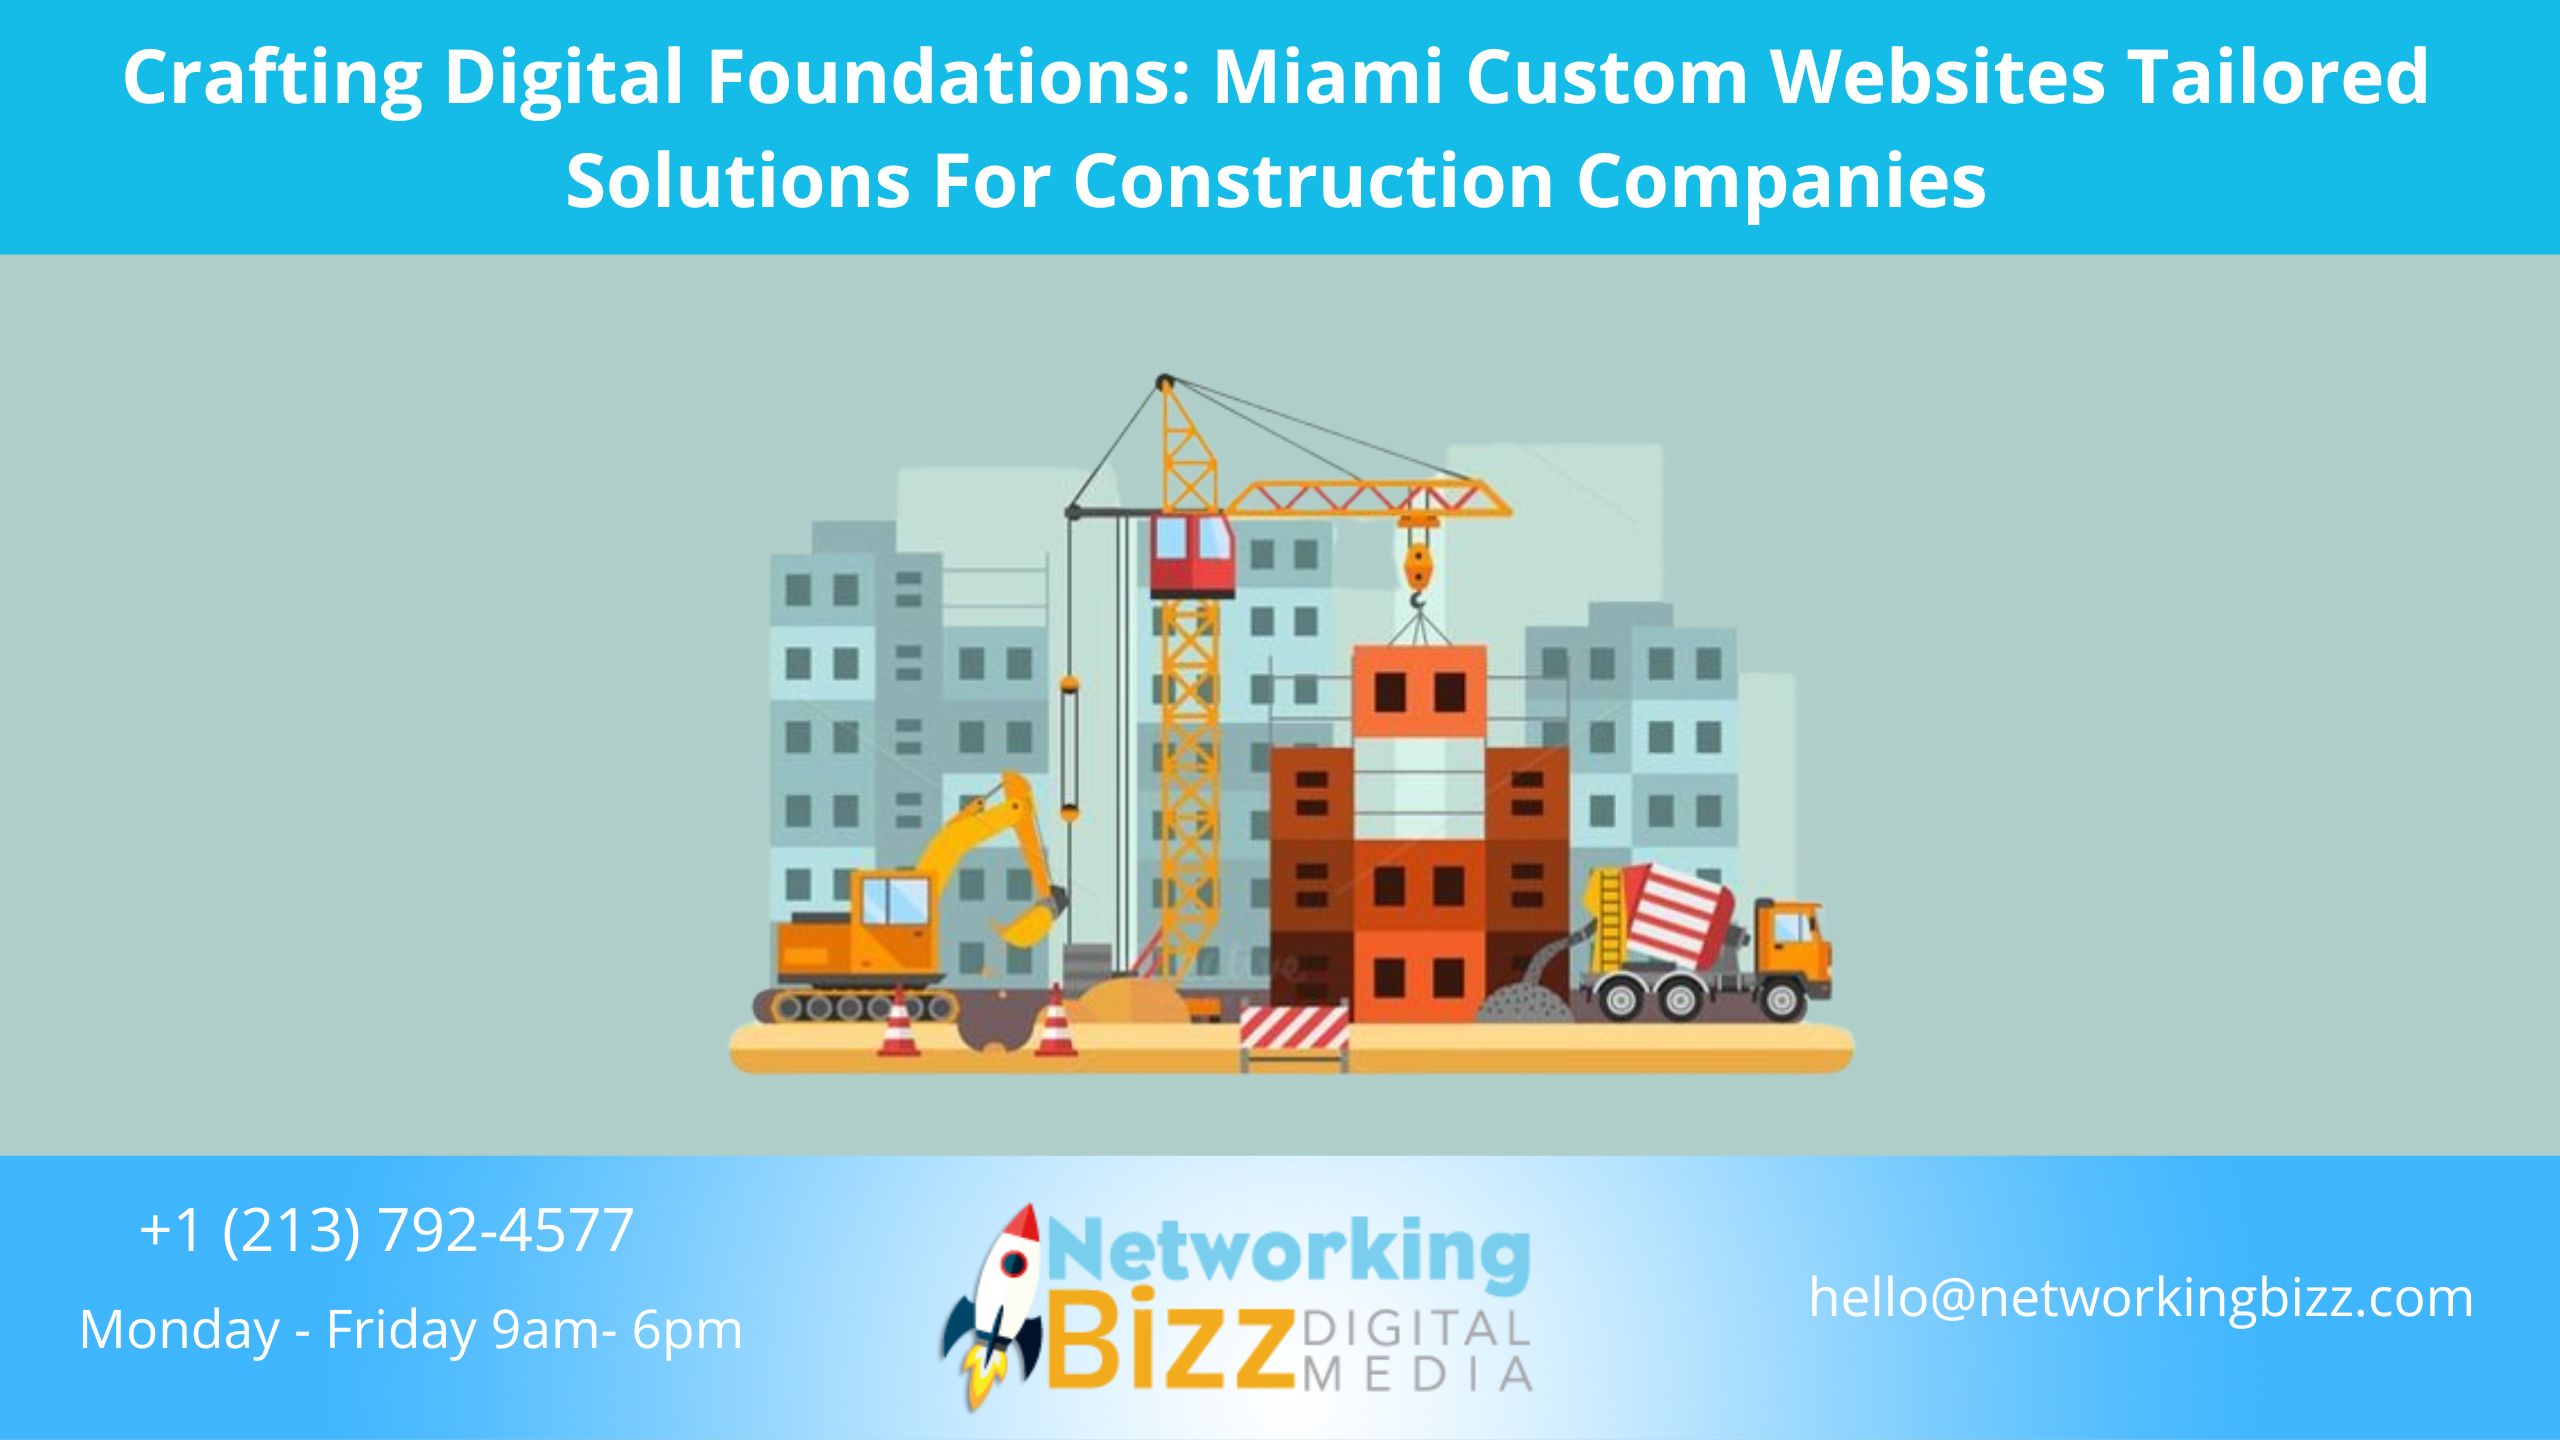 Crafting Digital Foundations: Miami Custom Websites Tailored Solutions For Construction Companies